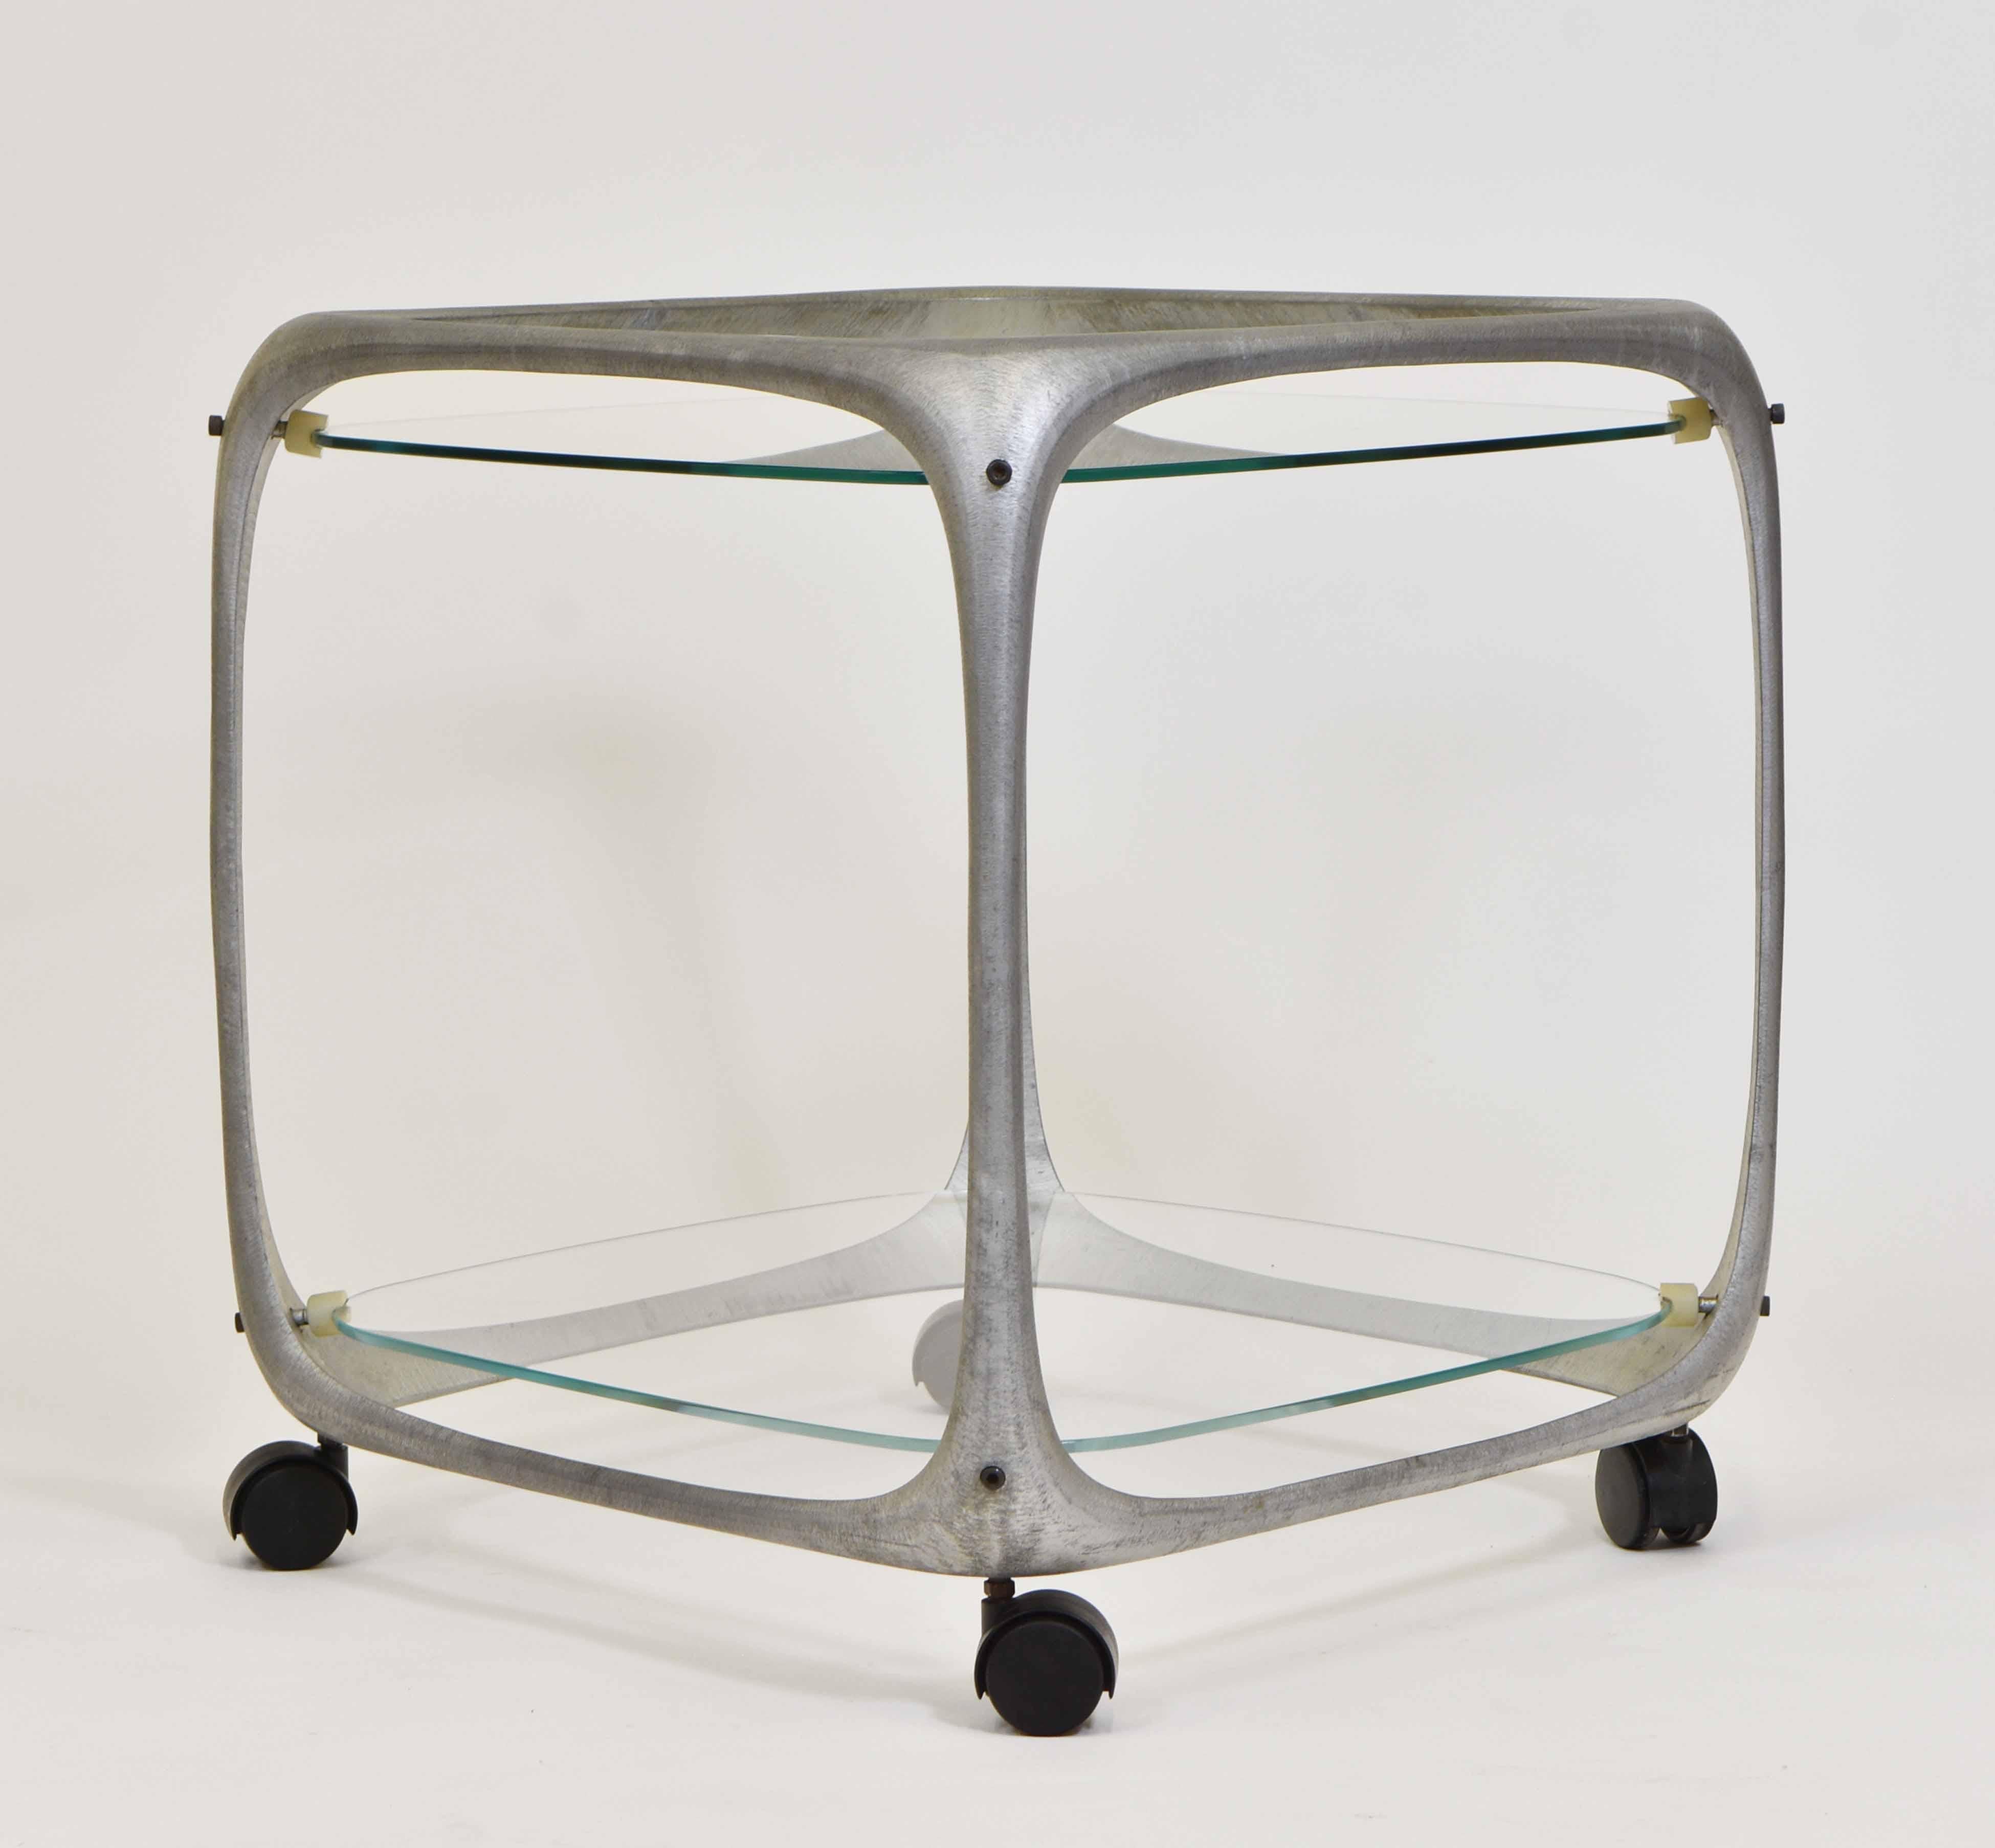 A fabulous cube form textured aluminium bar trolley, designed by Lorenzo Burchiellaro. Italy - Circa 1970s. Stamped 'burchiellaro'.

*Free delivery for all areas in mainland England & Wales only. Delivery to room of choice by a two person team.